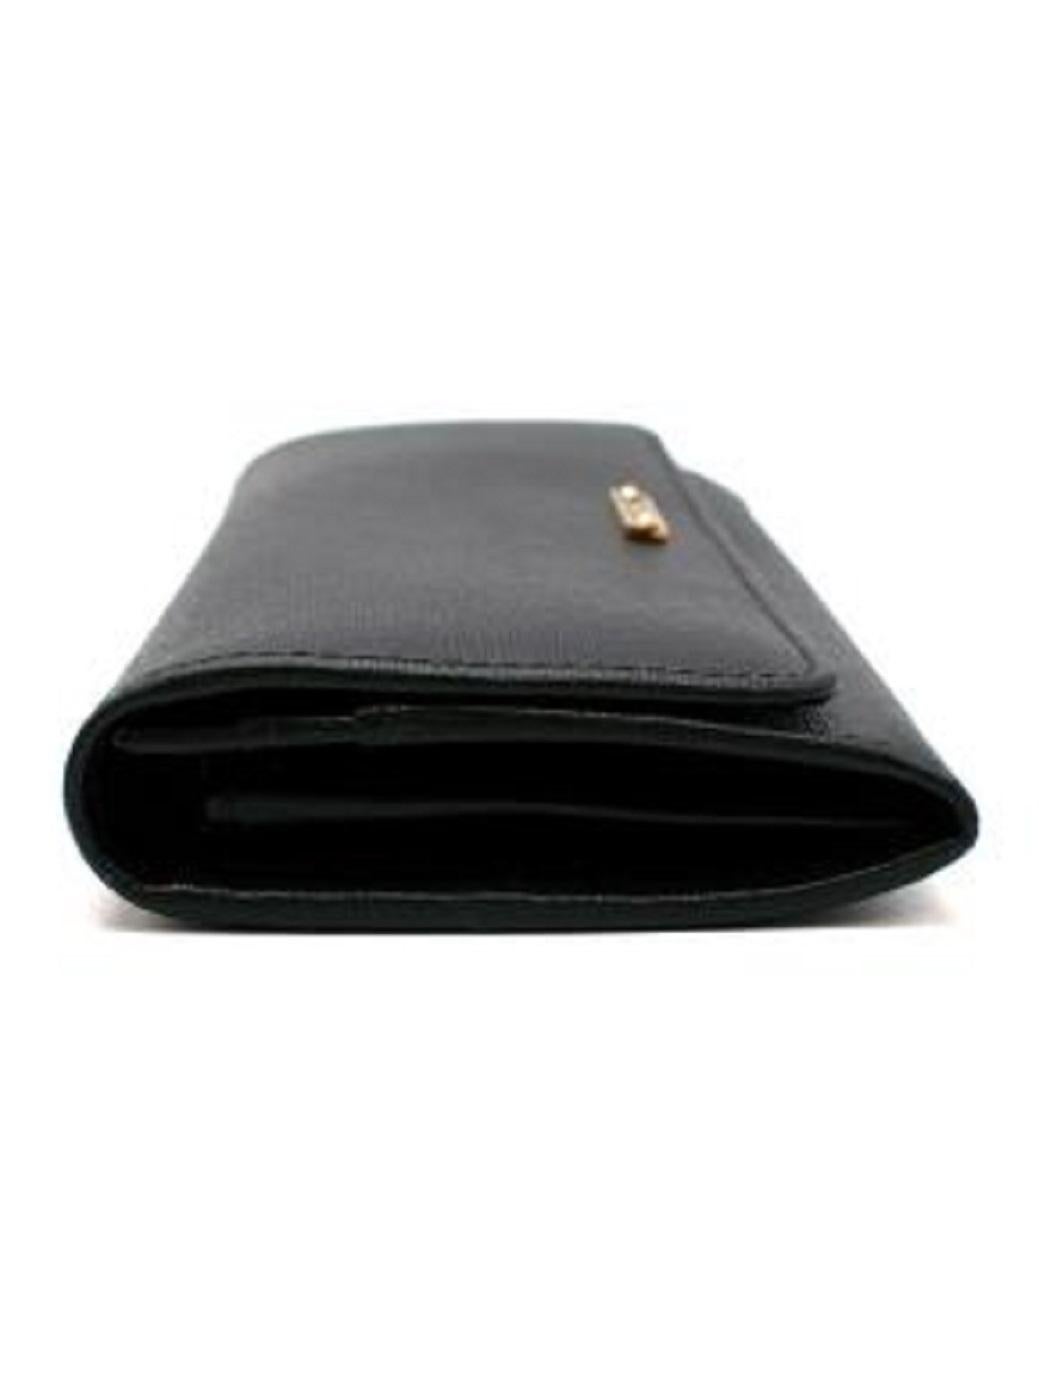 Fendi Grained Leather Wallet In Excellent Condition For Sale In London, GB